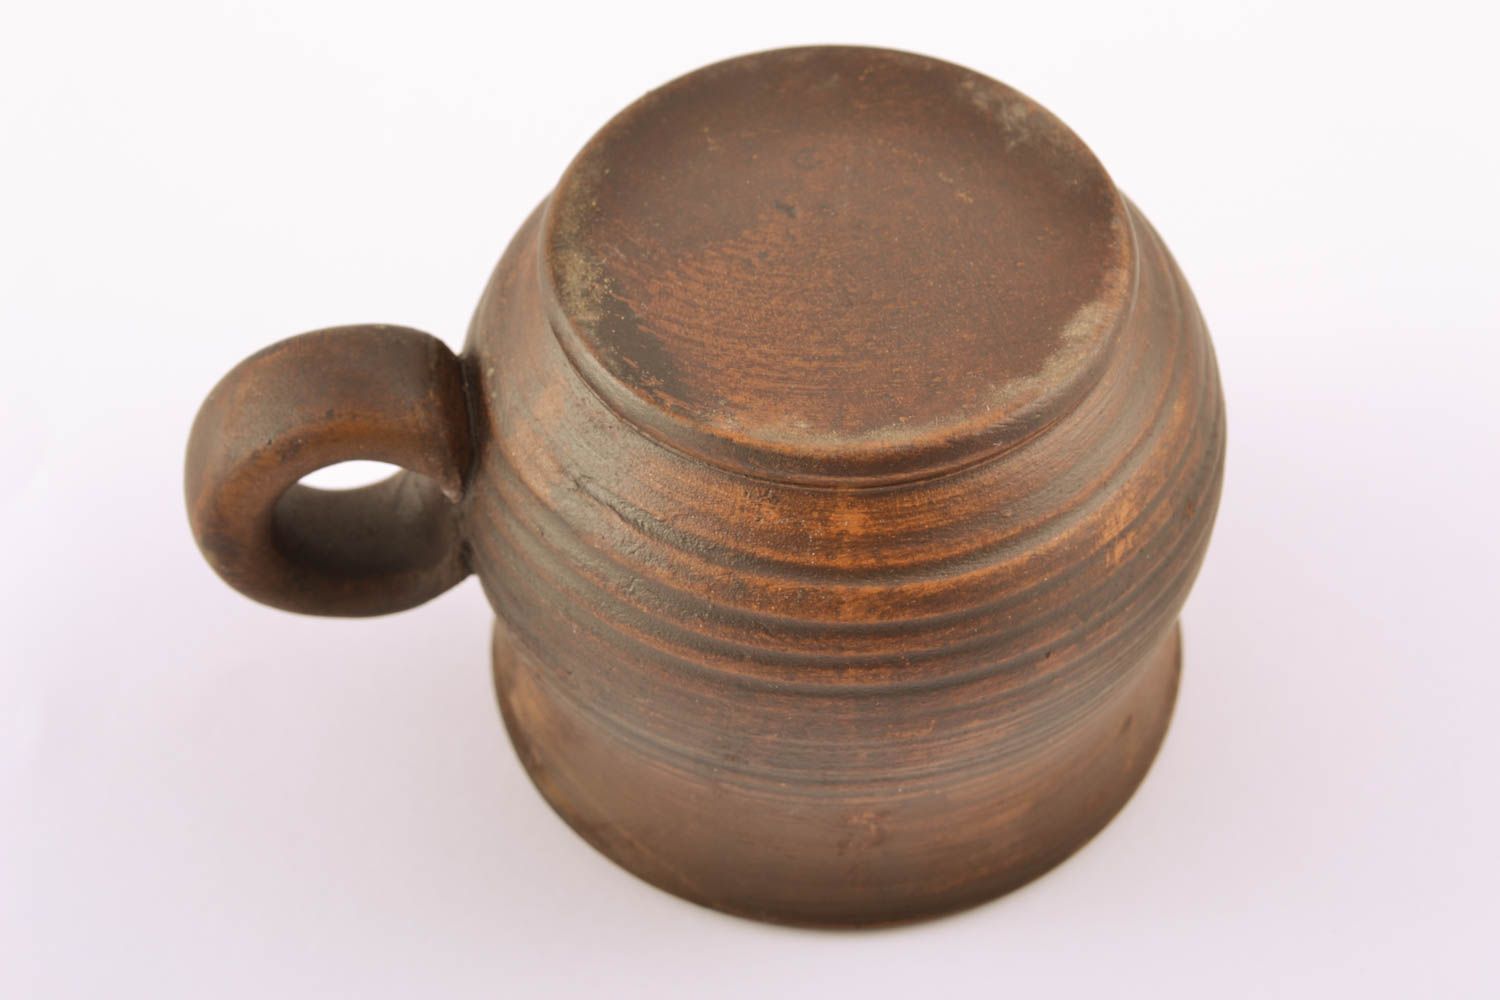 Rustic ceramic teacup in brown color with handle and no pattern photo 2